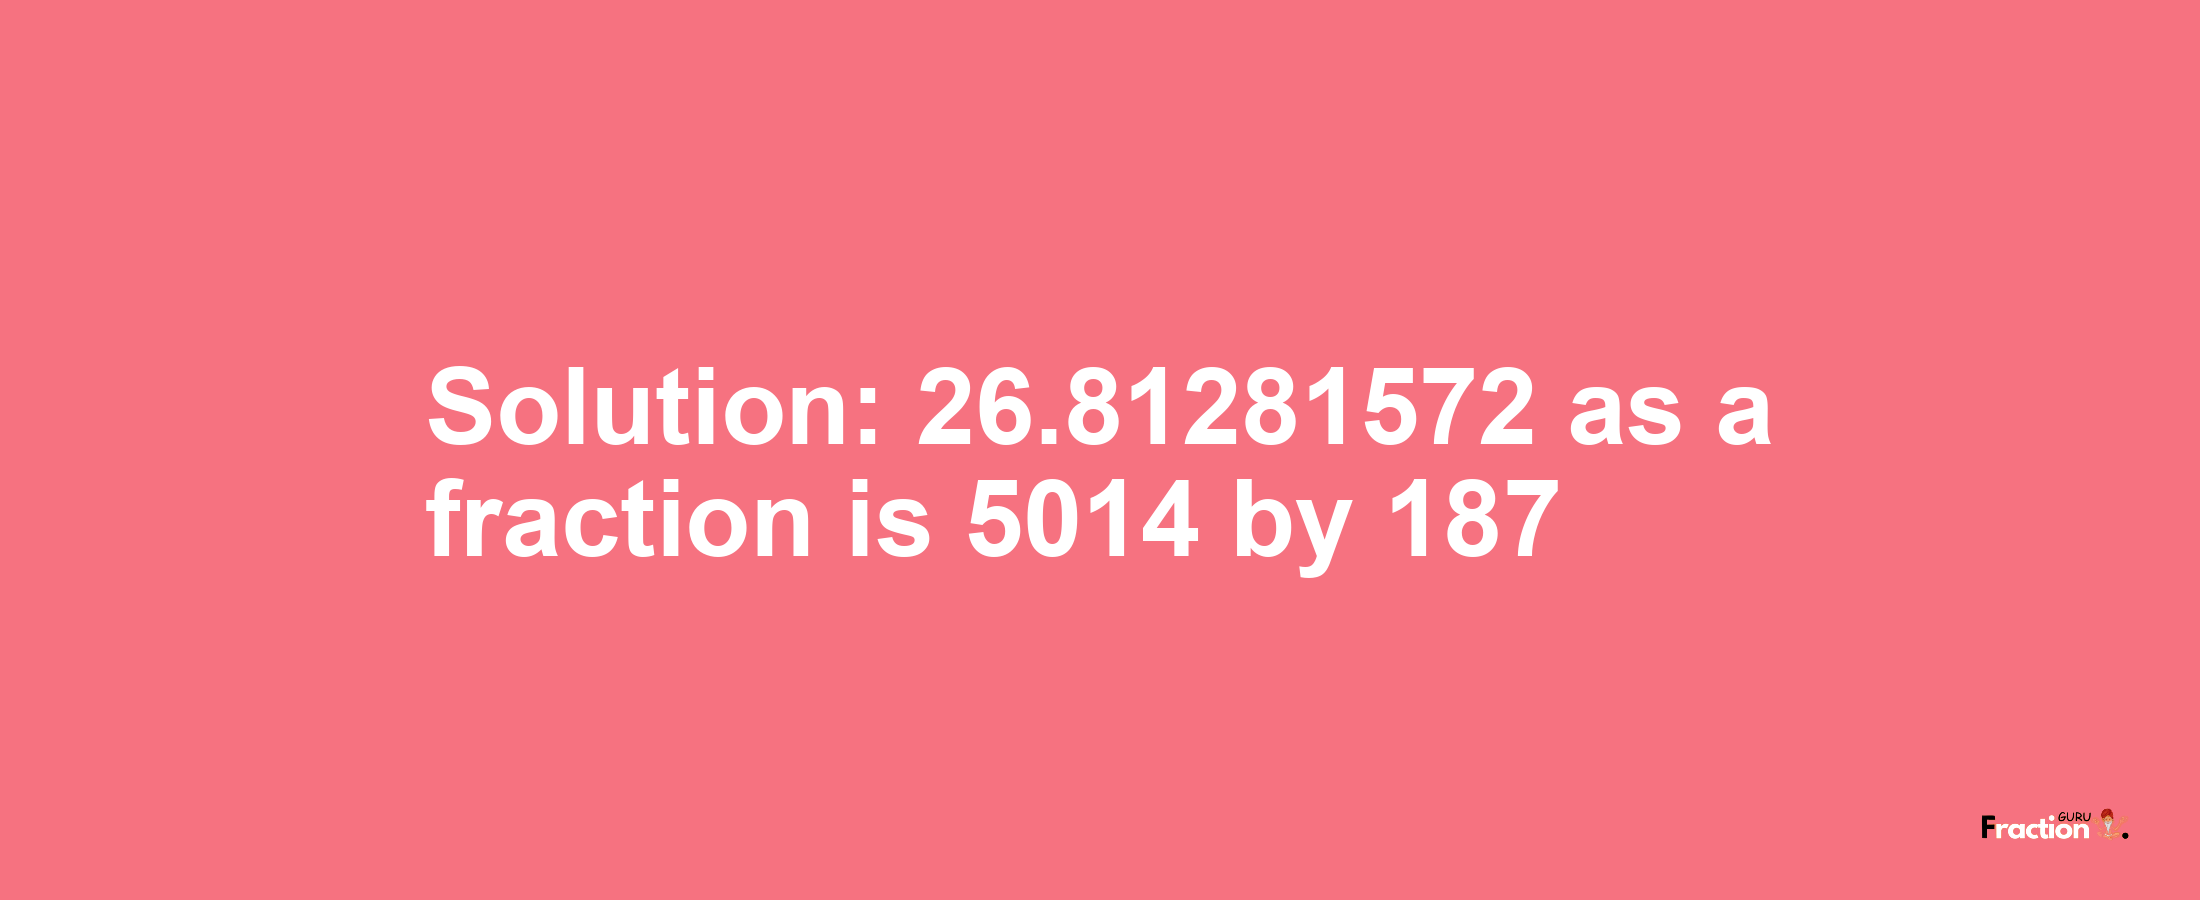 Solution:26.81281572 as a fraction is 5014/187